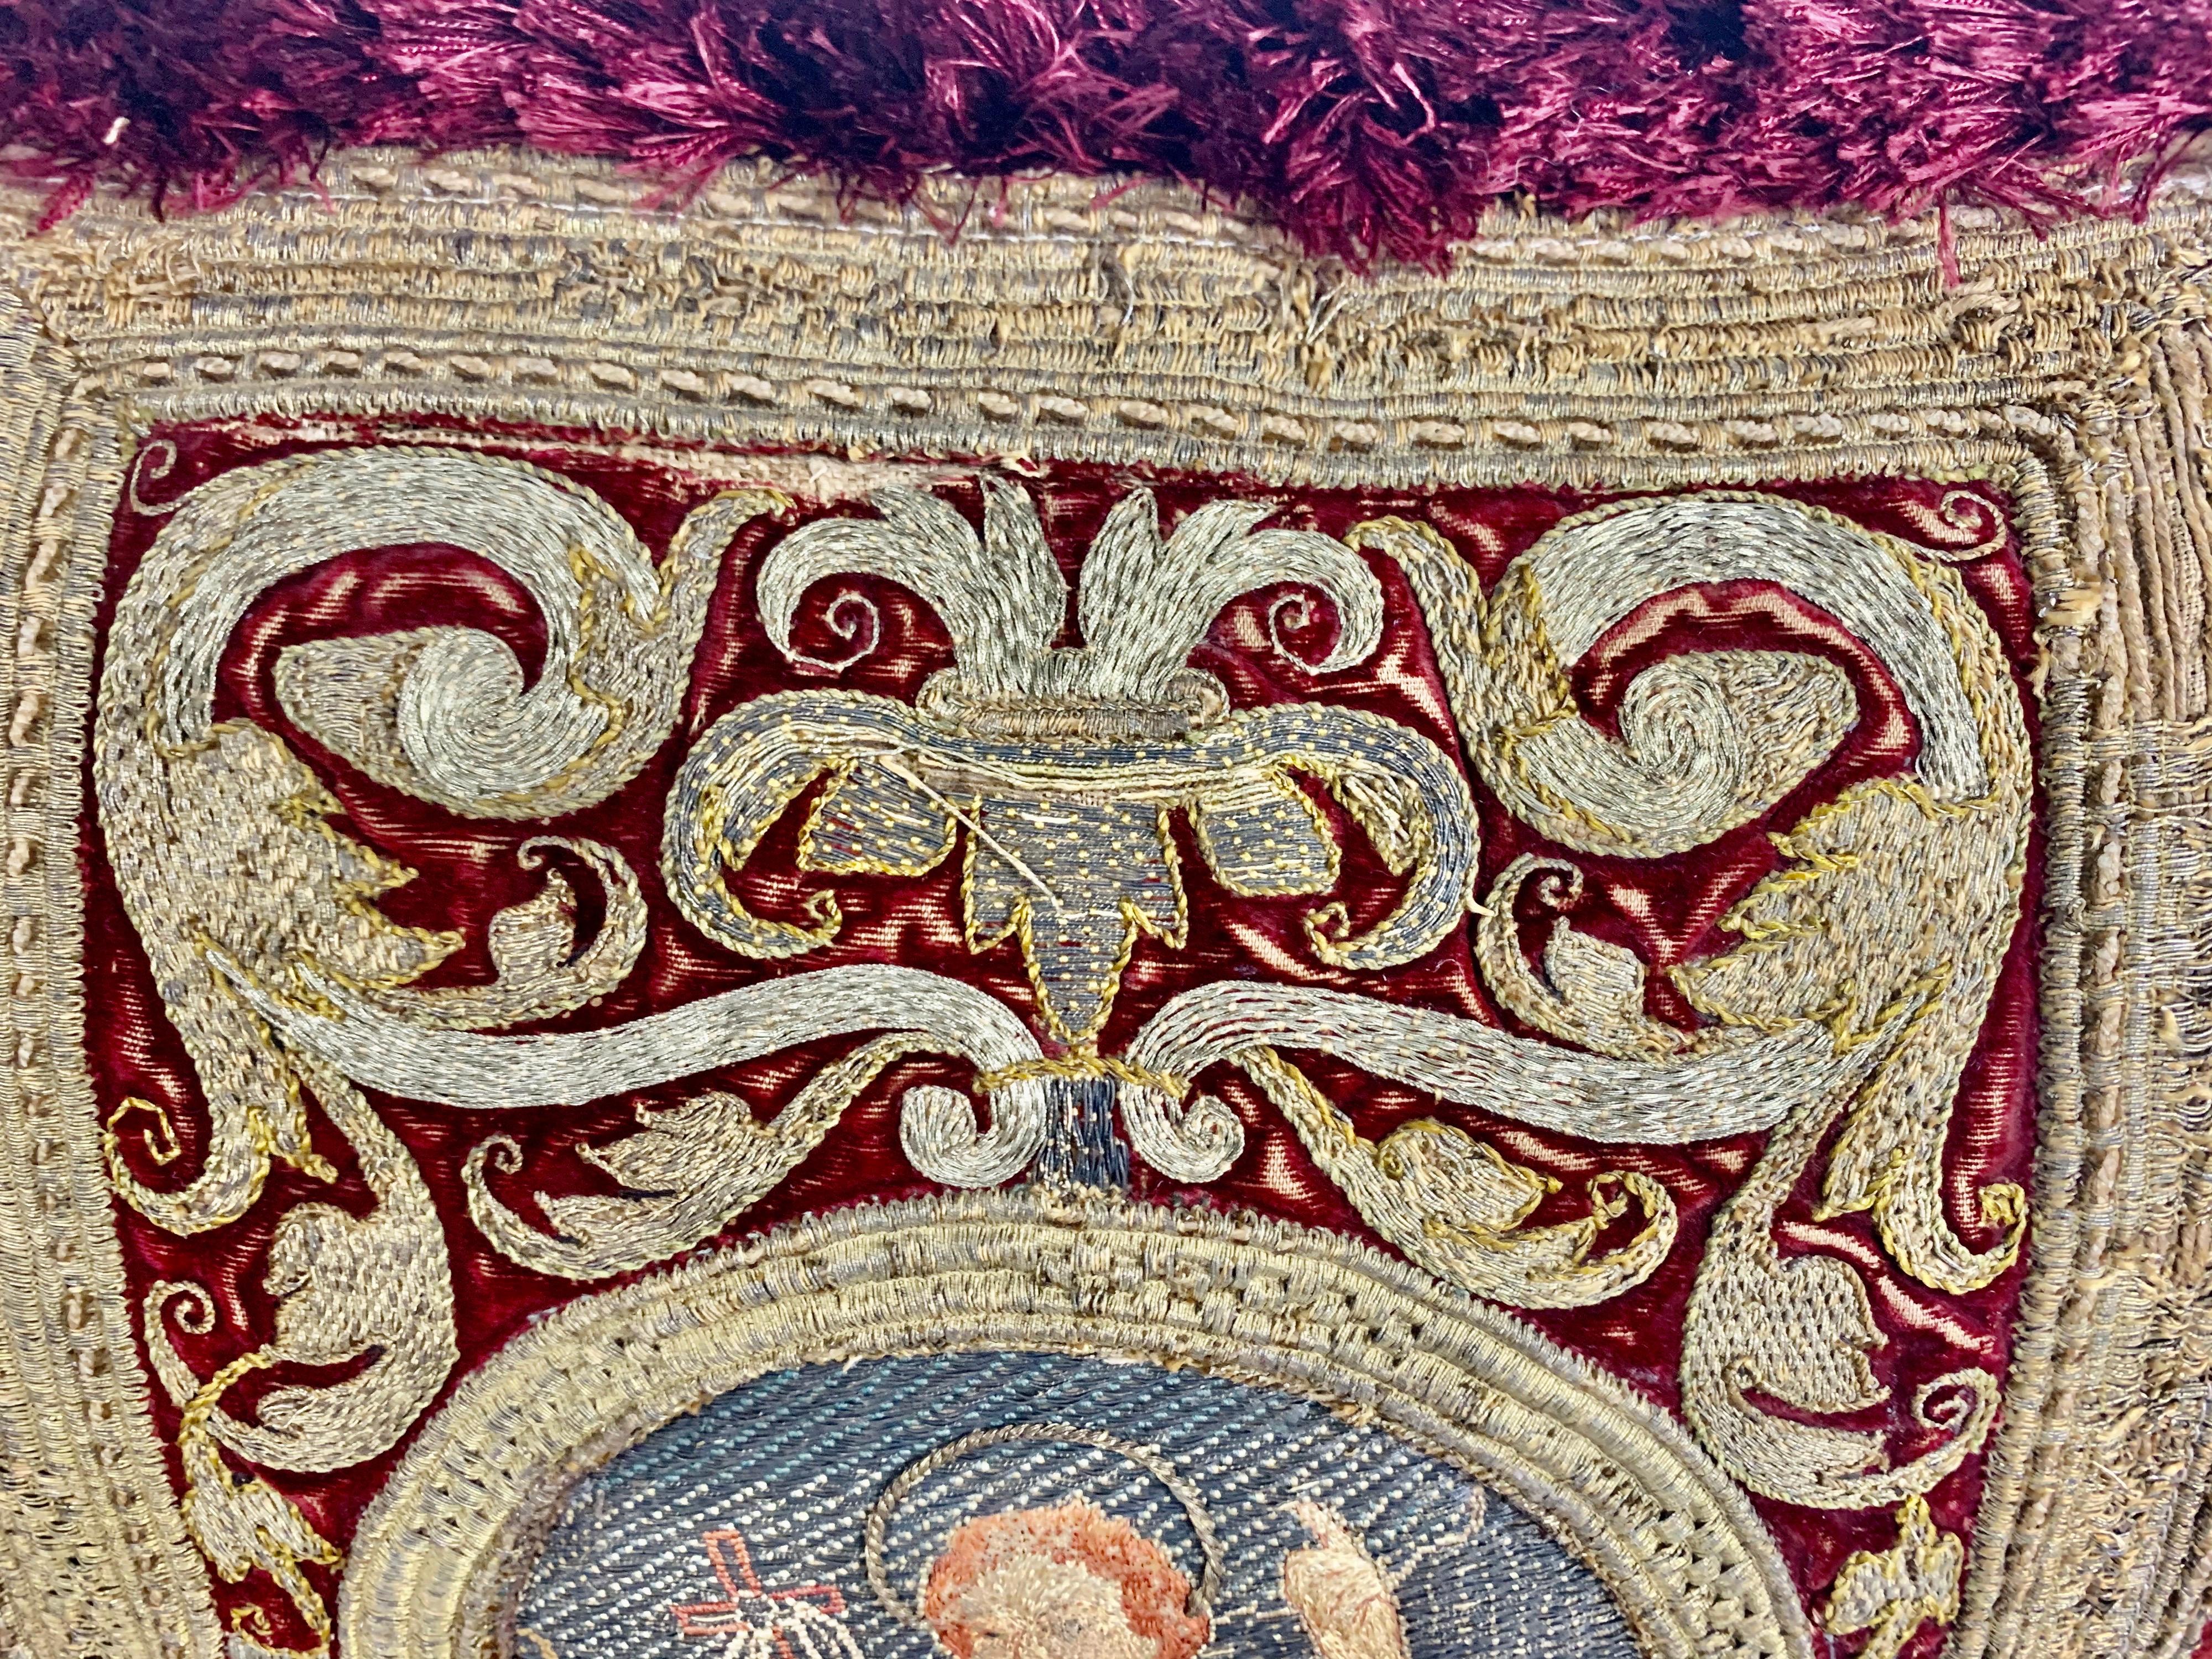 Contemporary Pair of 18th Century Metallic Embroidered Red Velvet Pillows